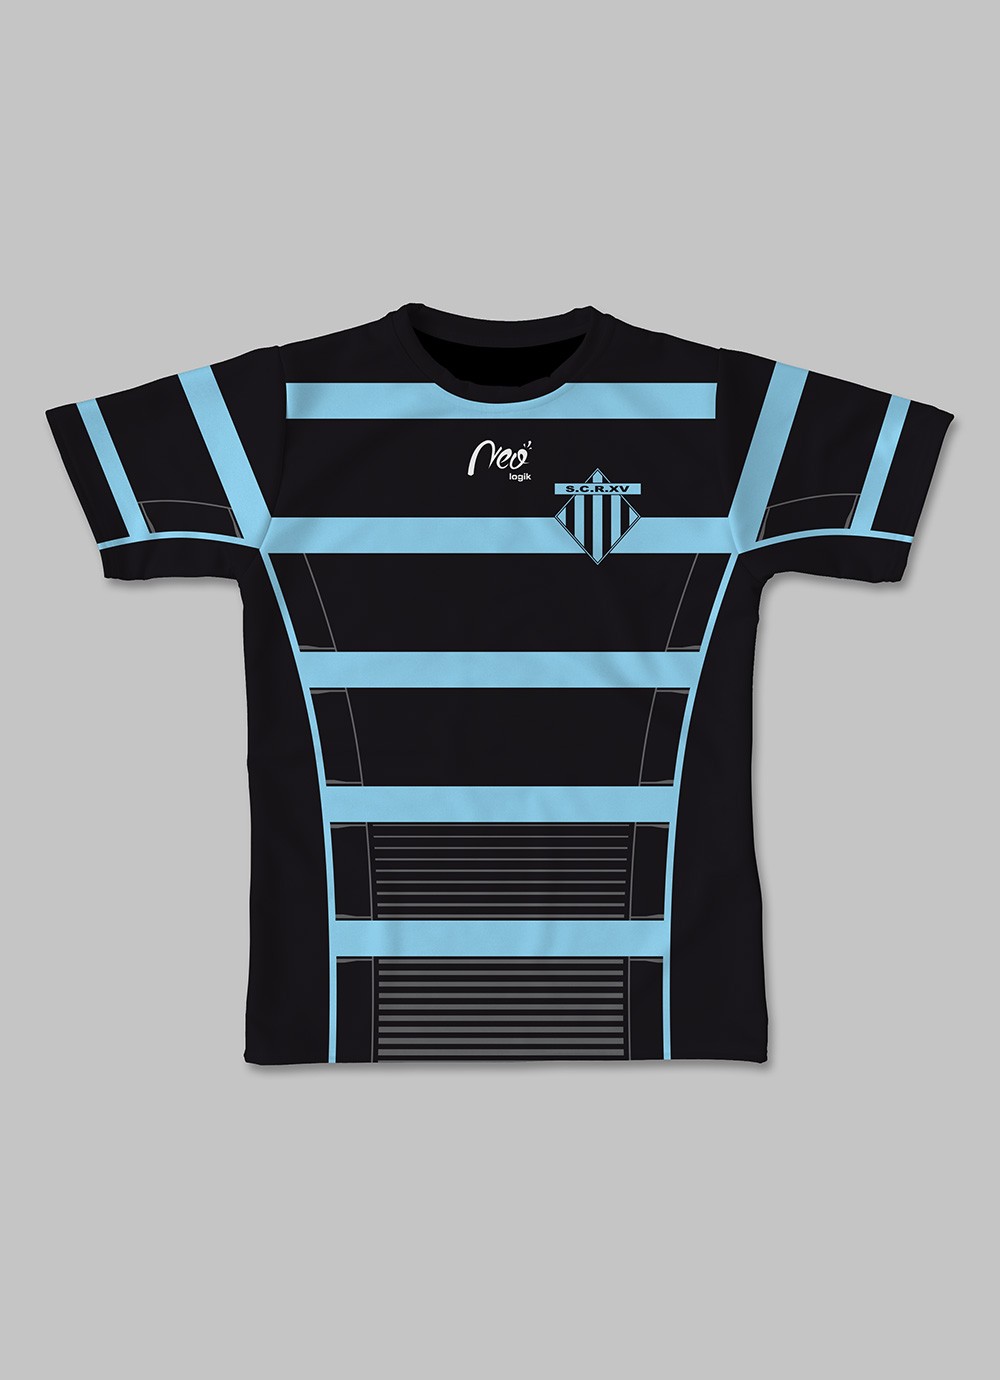 Maillot Effective Salanque Côte Radieuse XV 2019-2020 Rucking